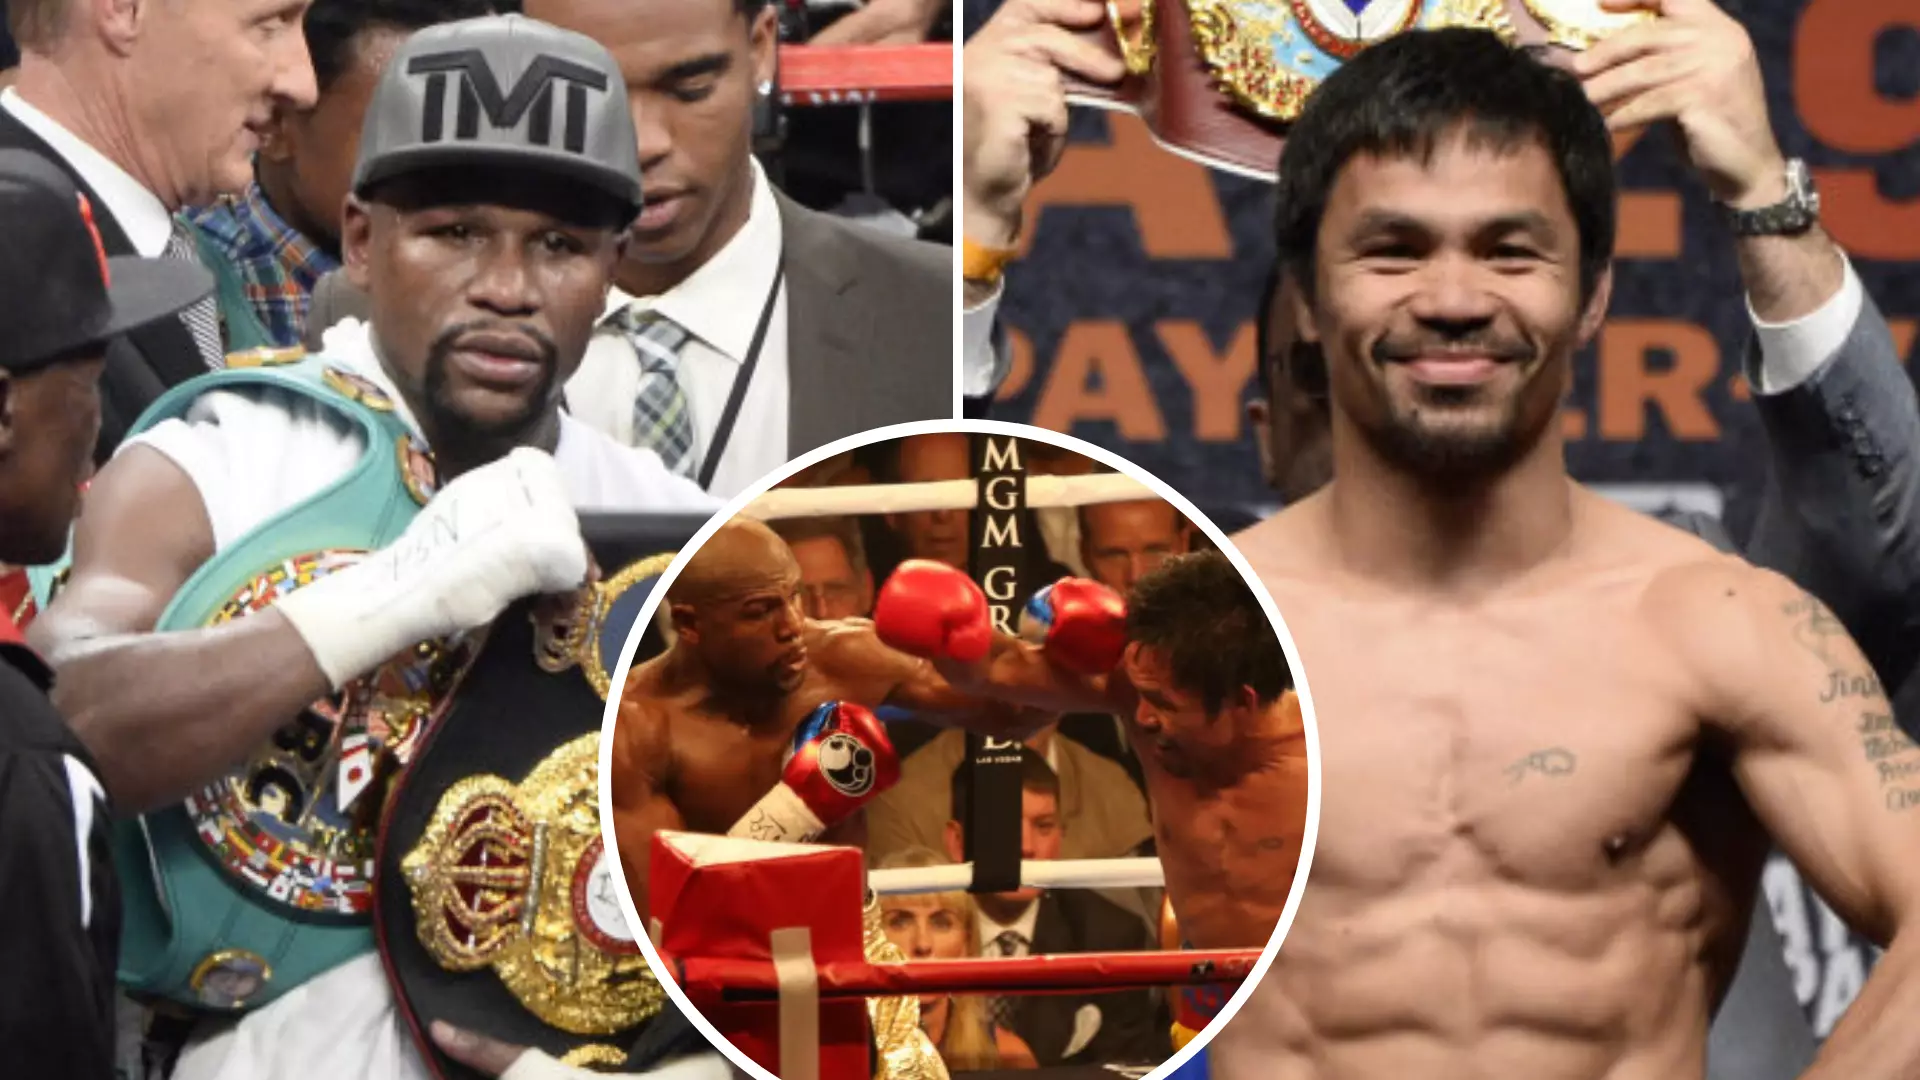 'Manny Pacquiao Is Better Pound-For-Pound Boxer, But Floyd Mayweather Beats Him Every Time,' Says Max Kellerman